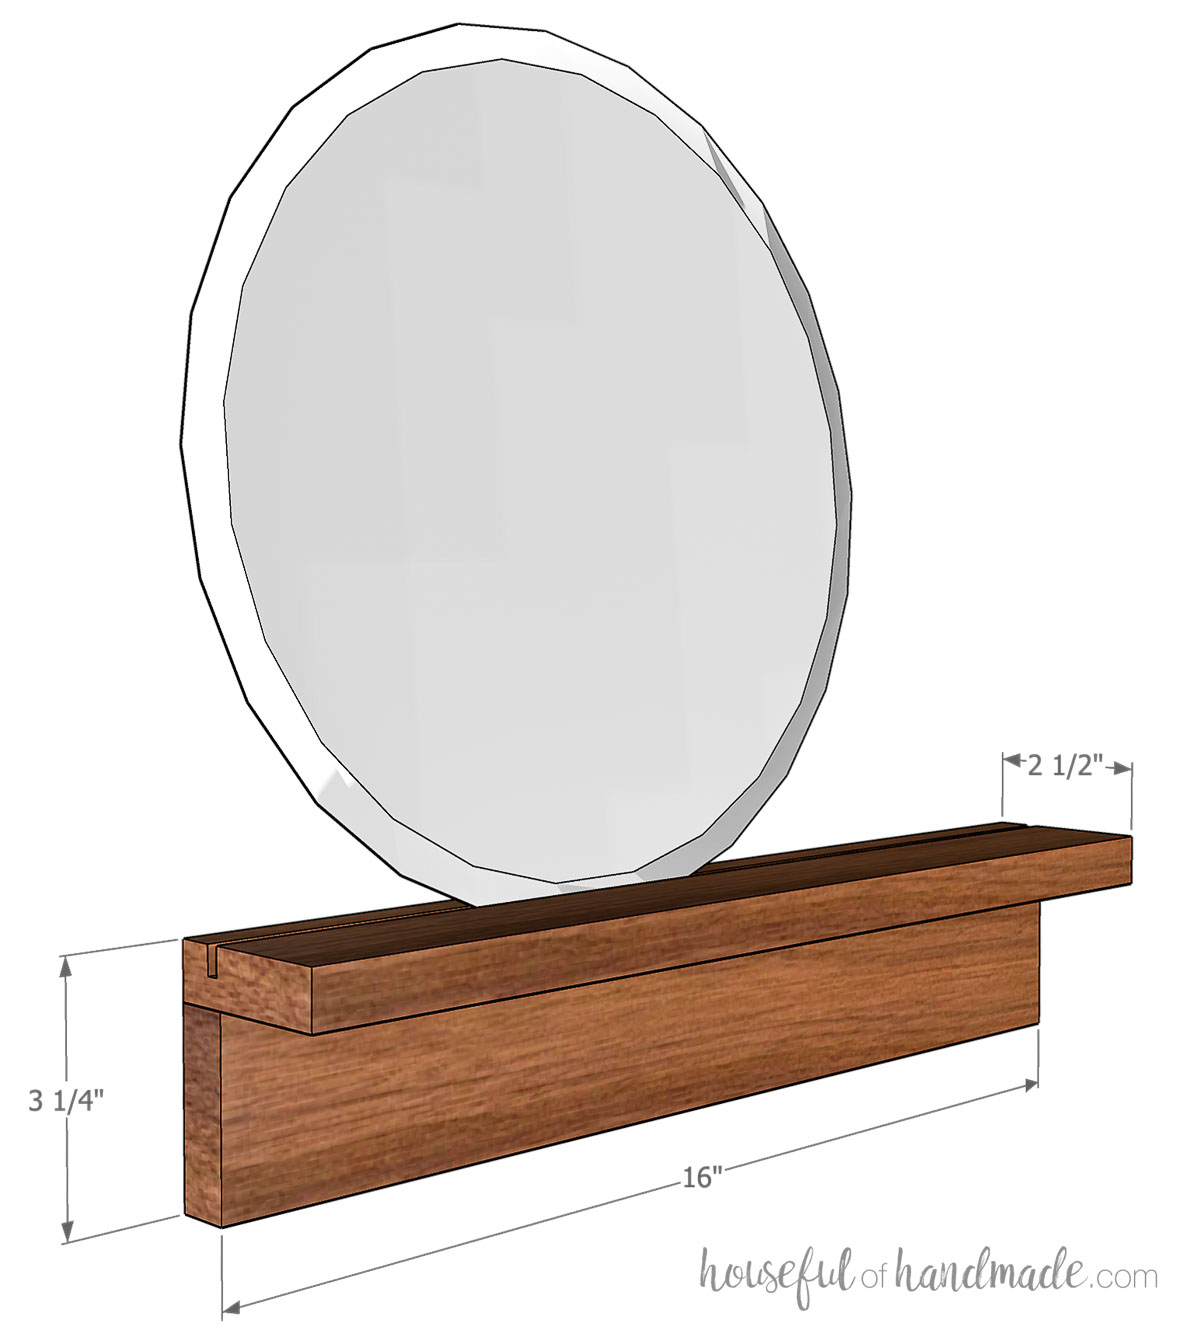 3D rendering of the wall shelf with dimensions noted. 